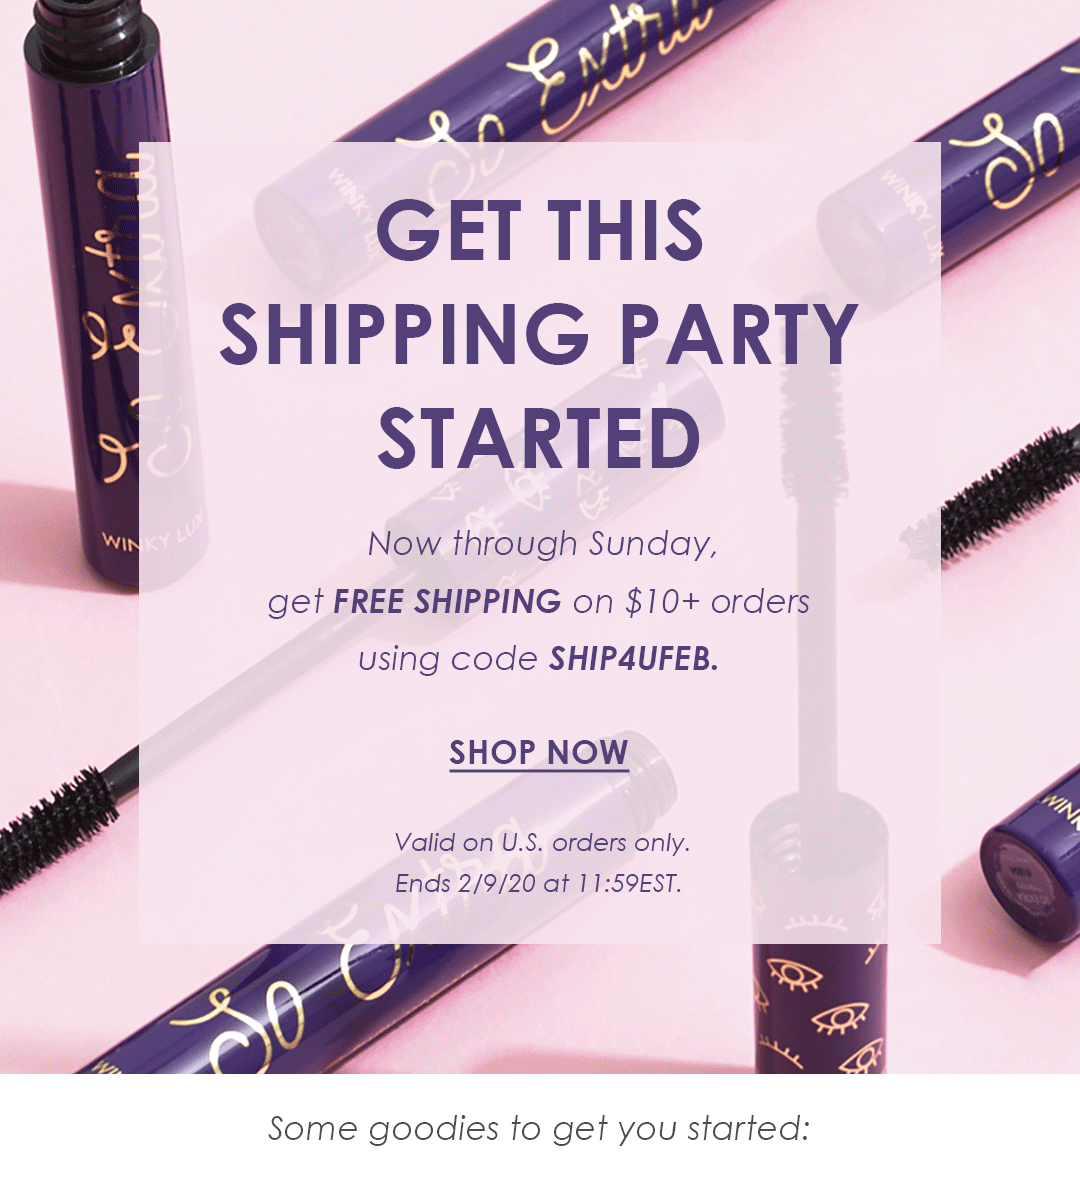 Get Free Shipping with code SHIP4UFEB. SHOP NOW!